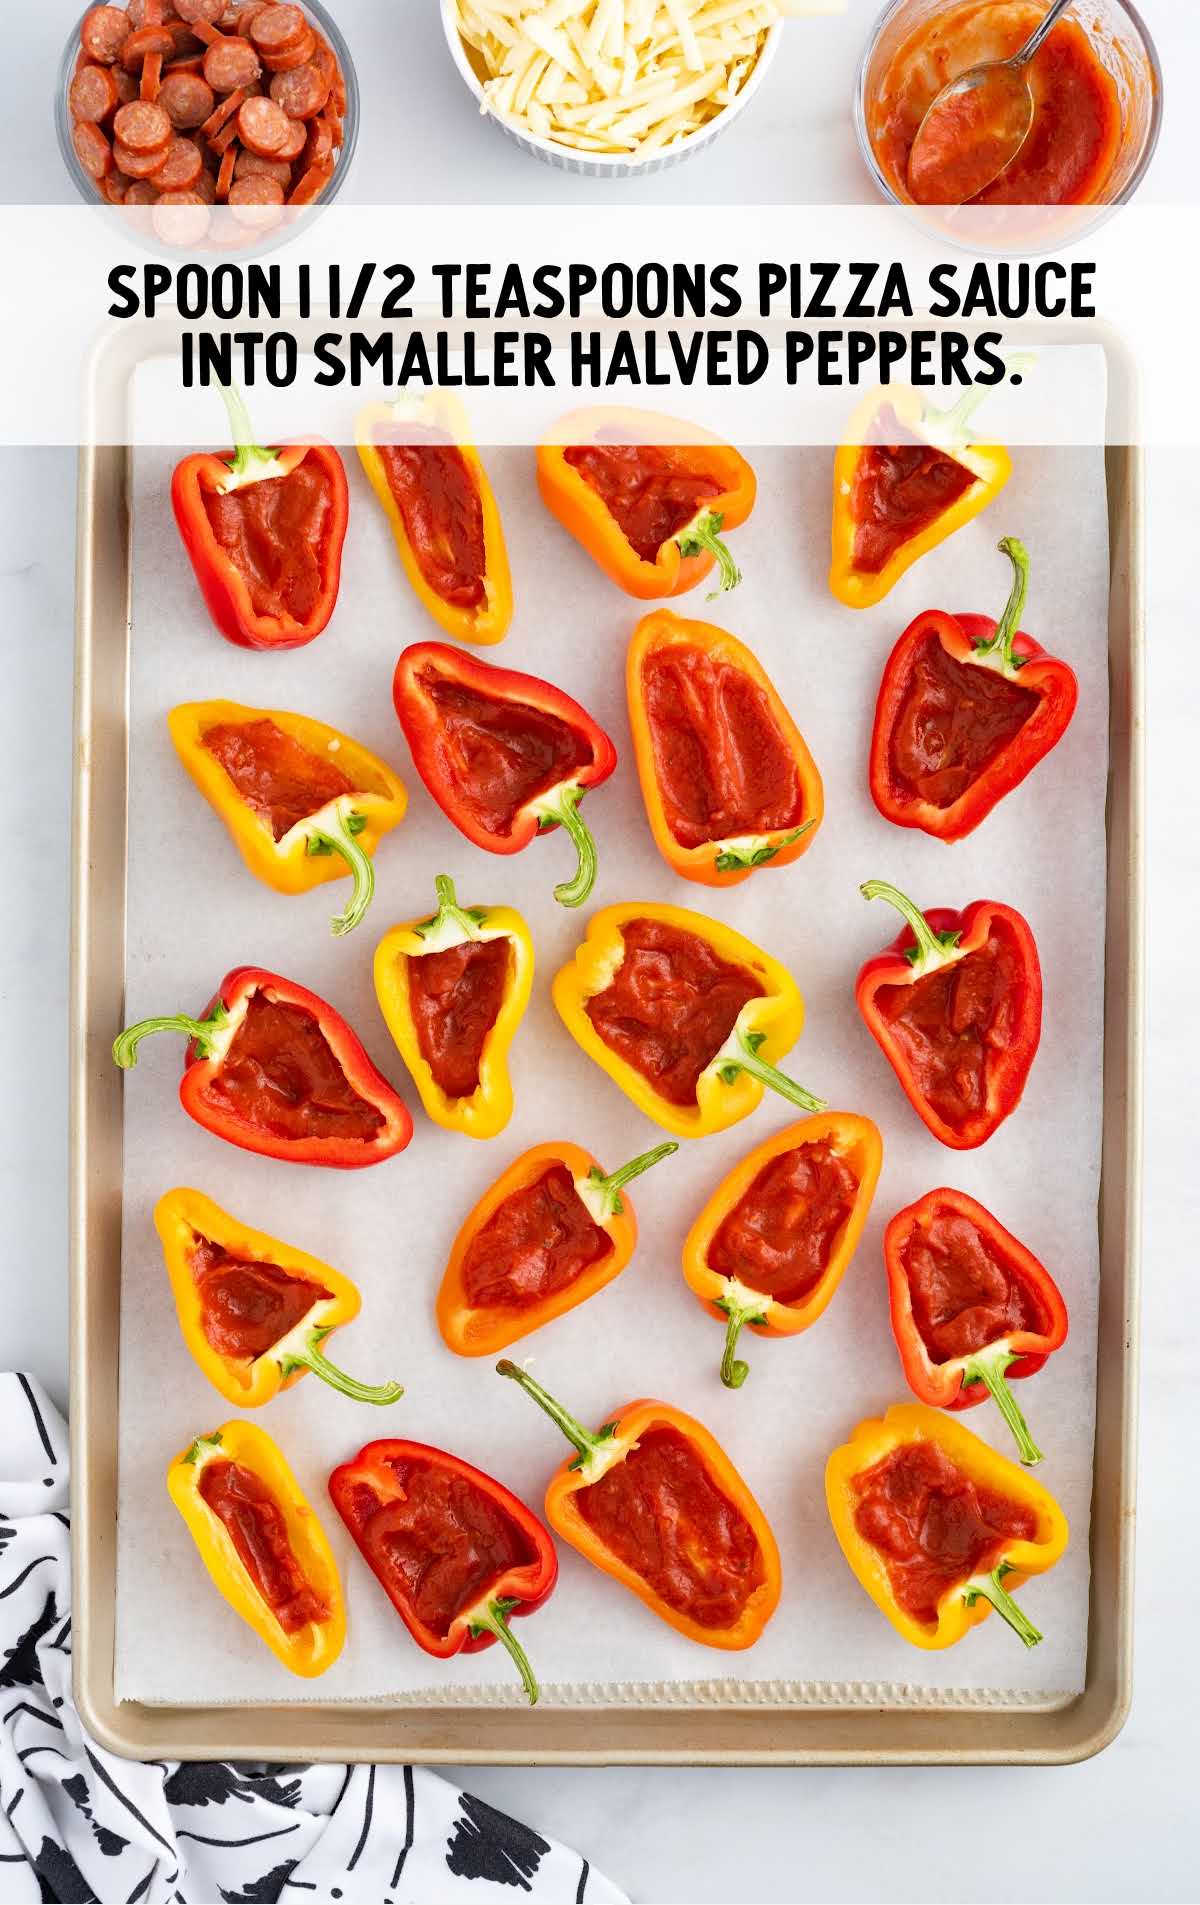 pizza sauce spooned into the halved peppers in a baking tray